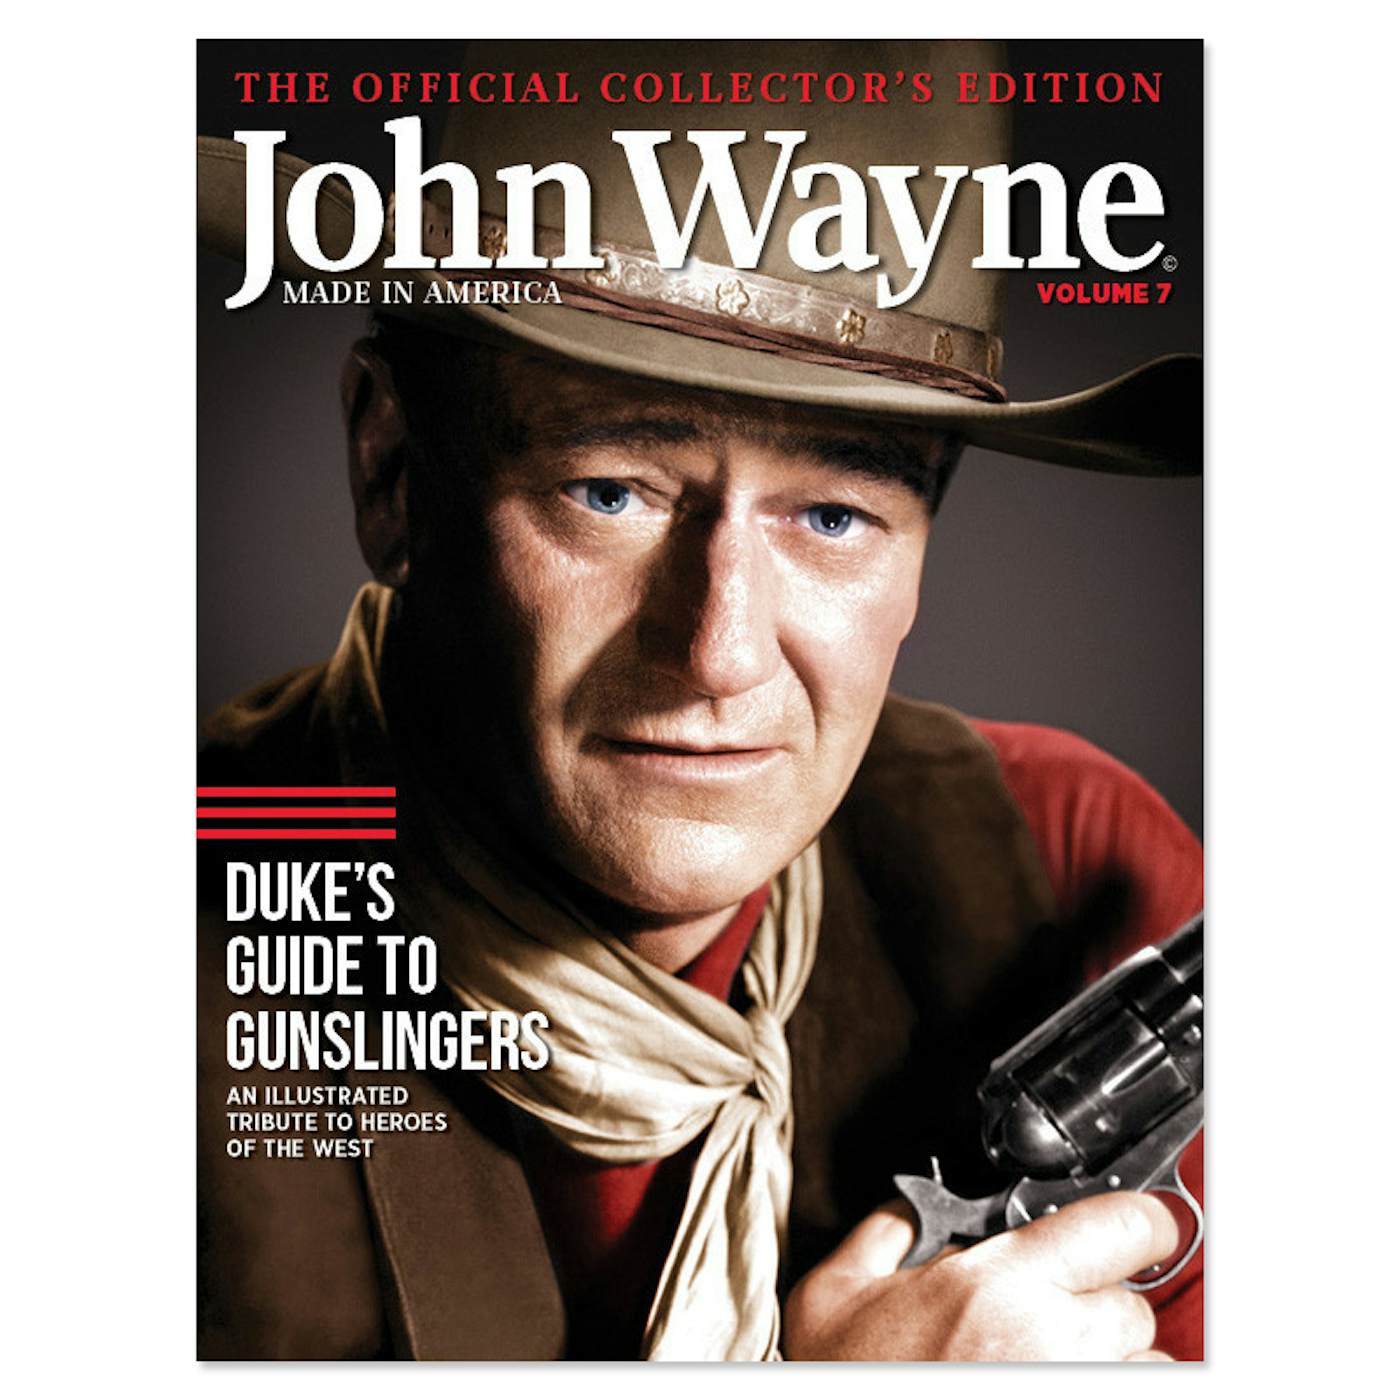 John Wayne - The Official Collector's Edition, vol 7: Duke's Guide to Gunslingers